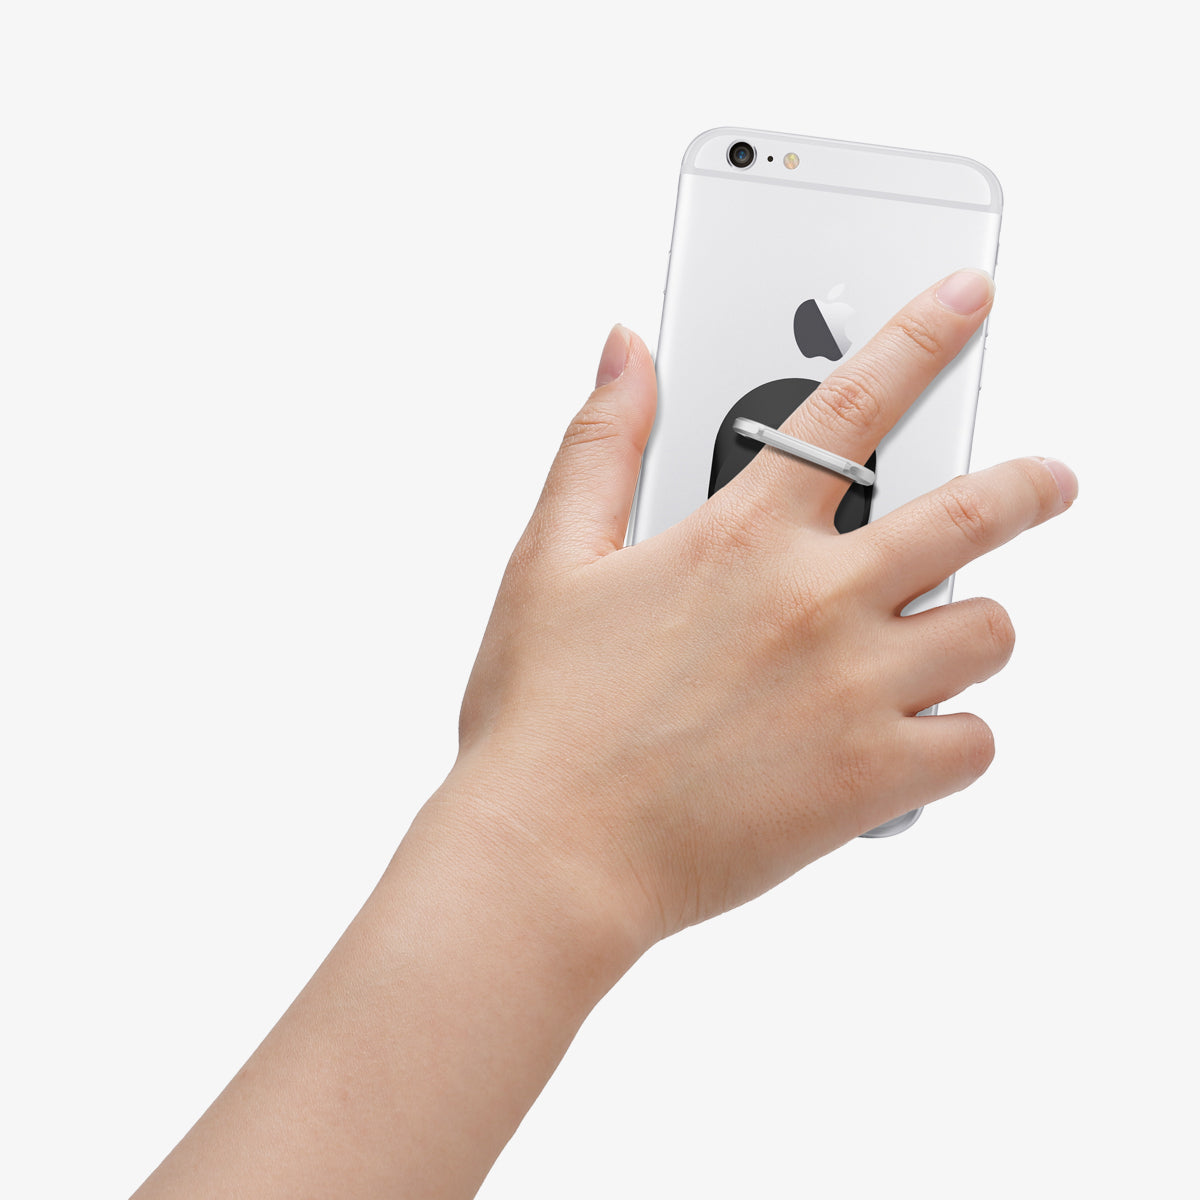 SGP11845 - Style Ring in black showing the phone in someone's hand with ring attached to back of device